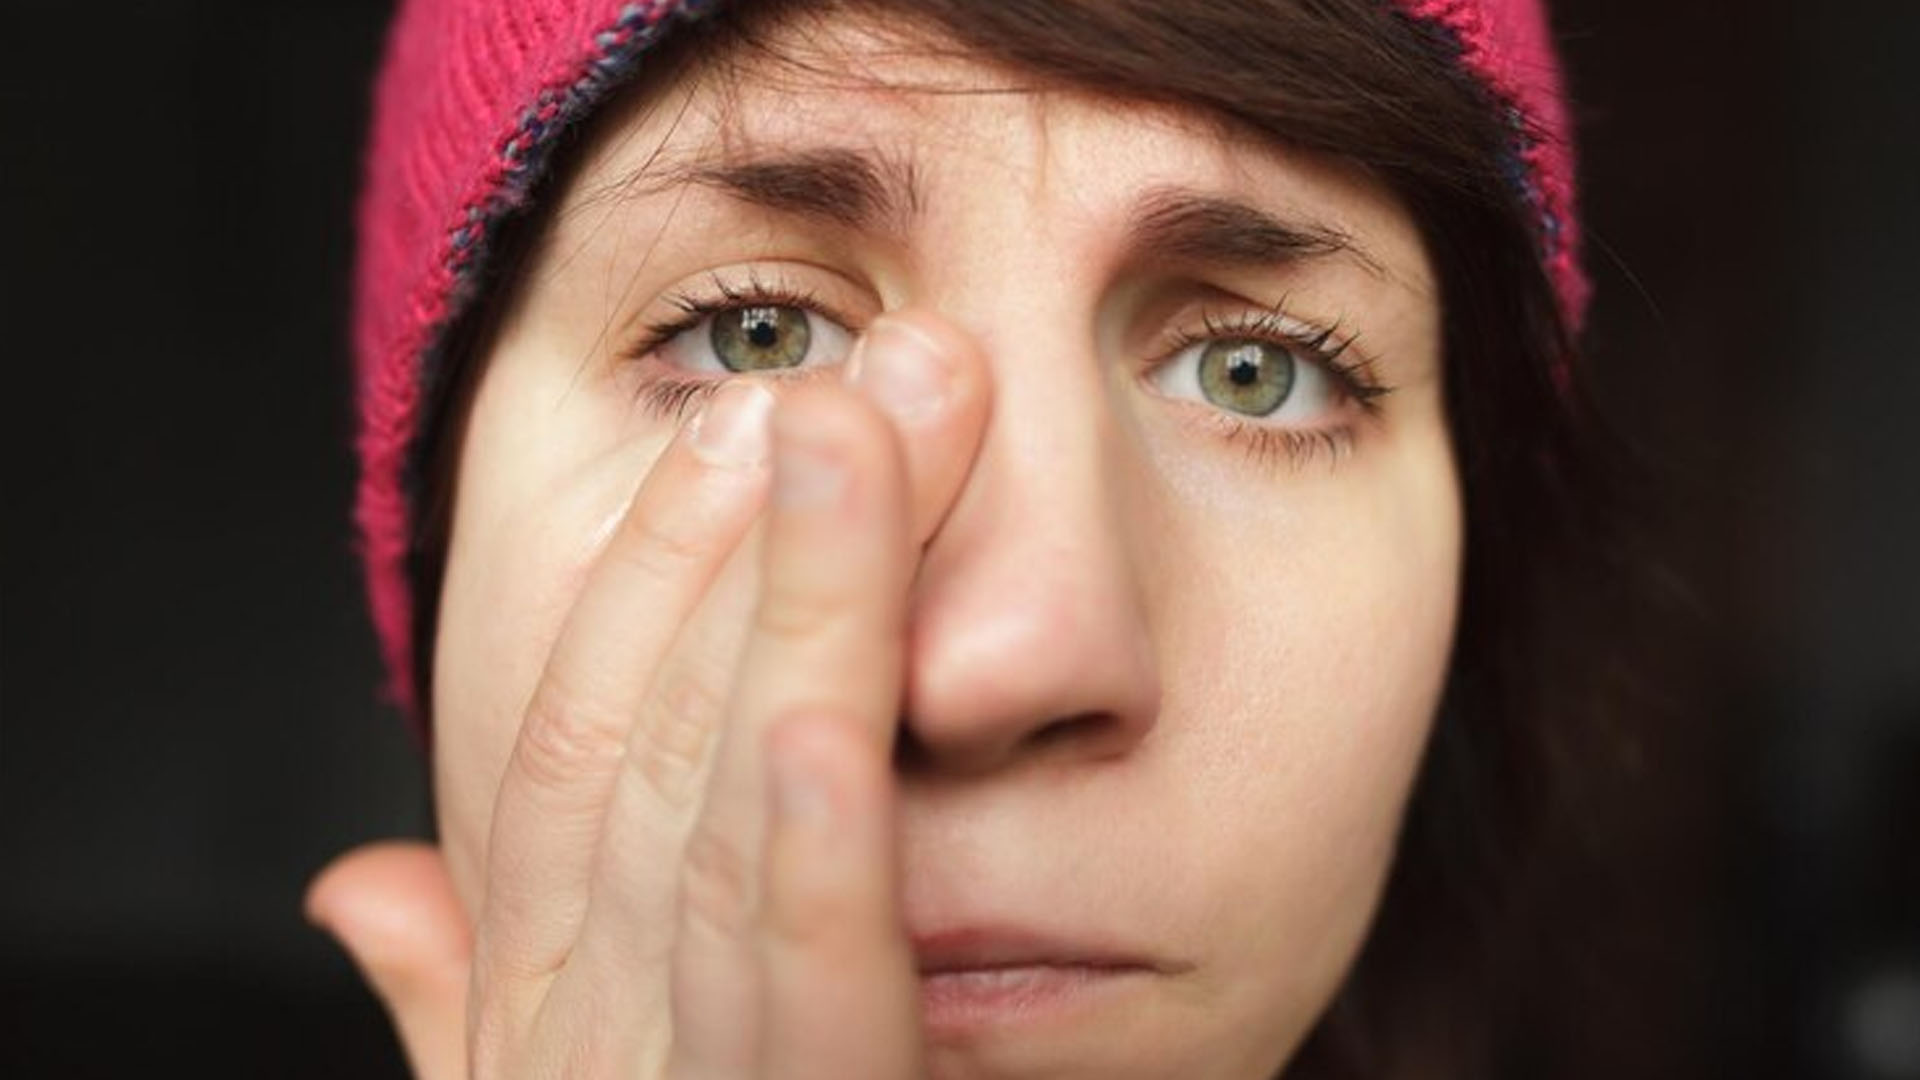 What are the Home Remedies for Stringy Eye Mucus?